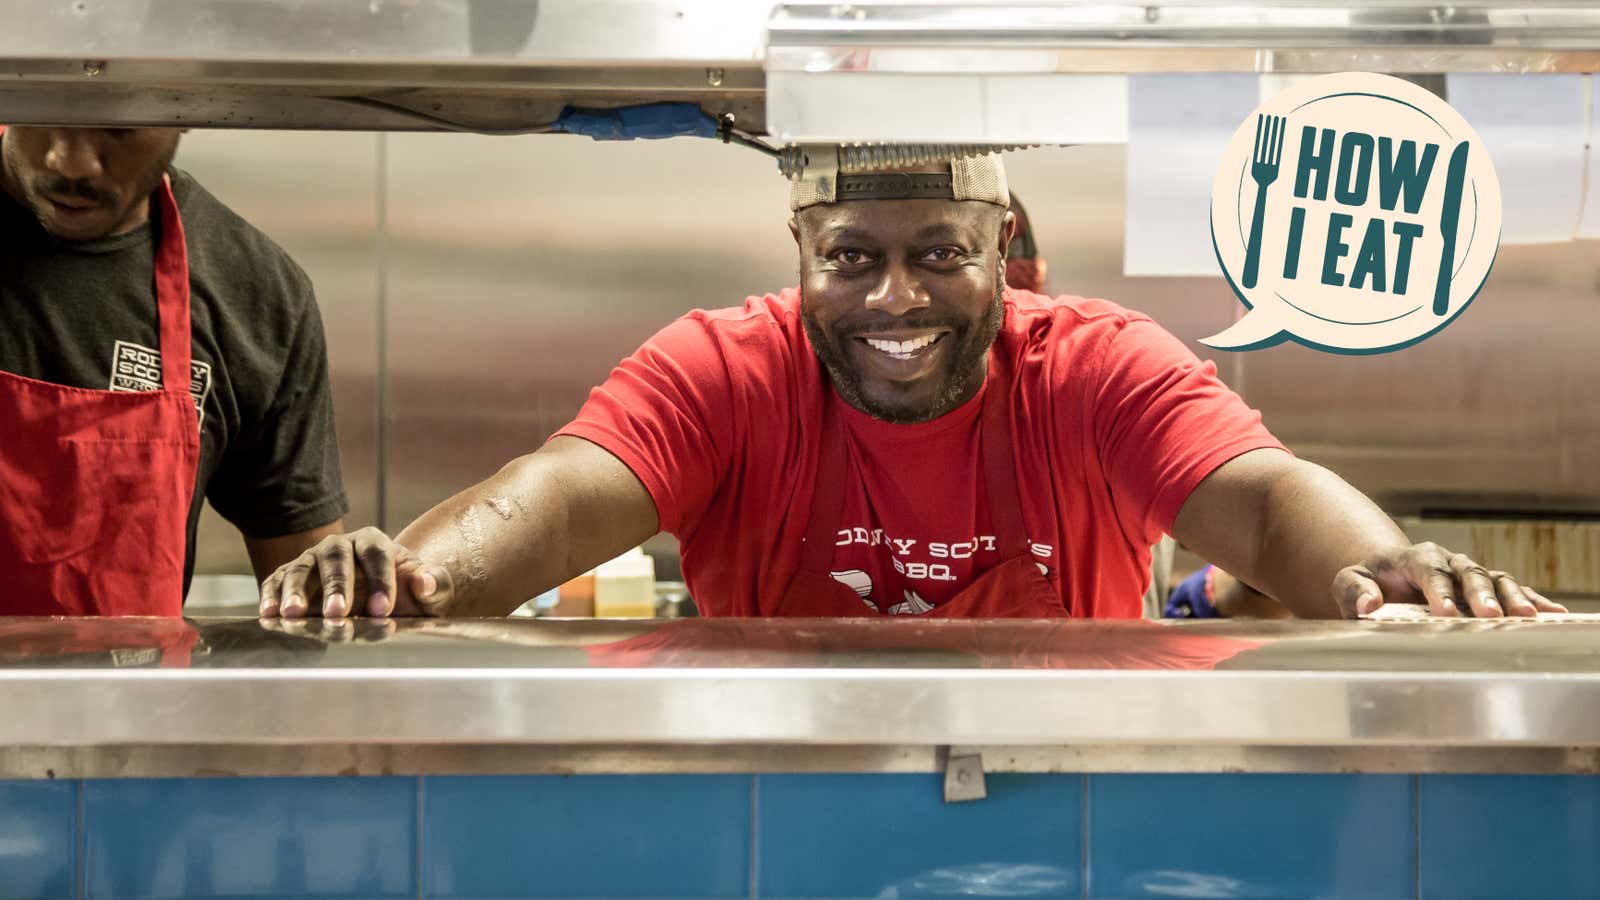 I'm Chef and Pitmaster Rodney Scott, and This Is How I Eat